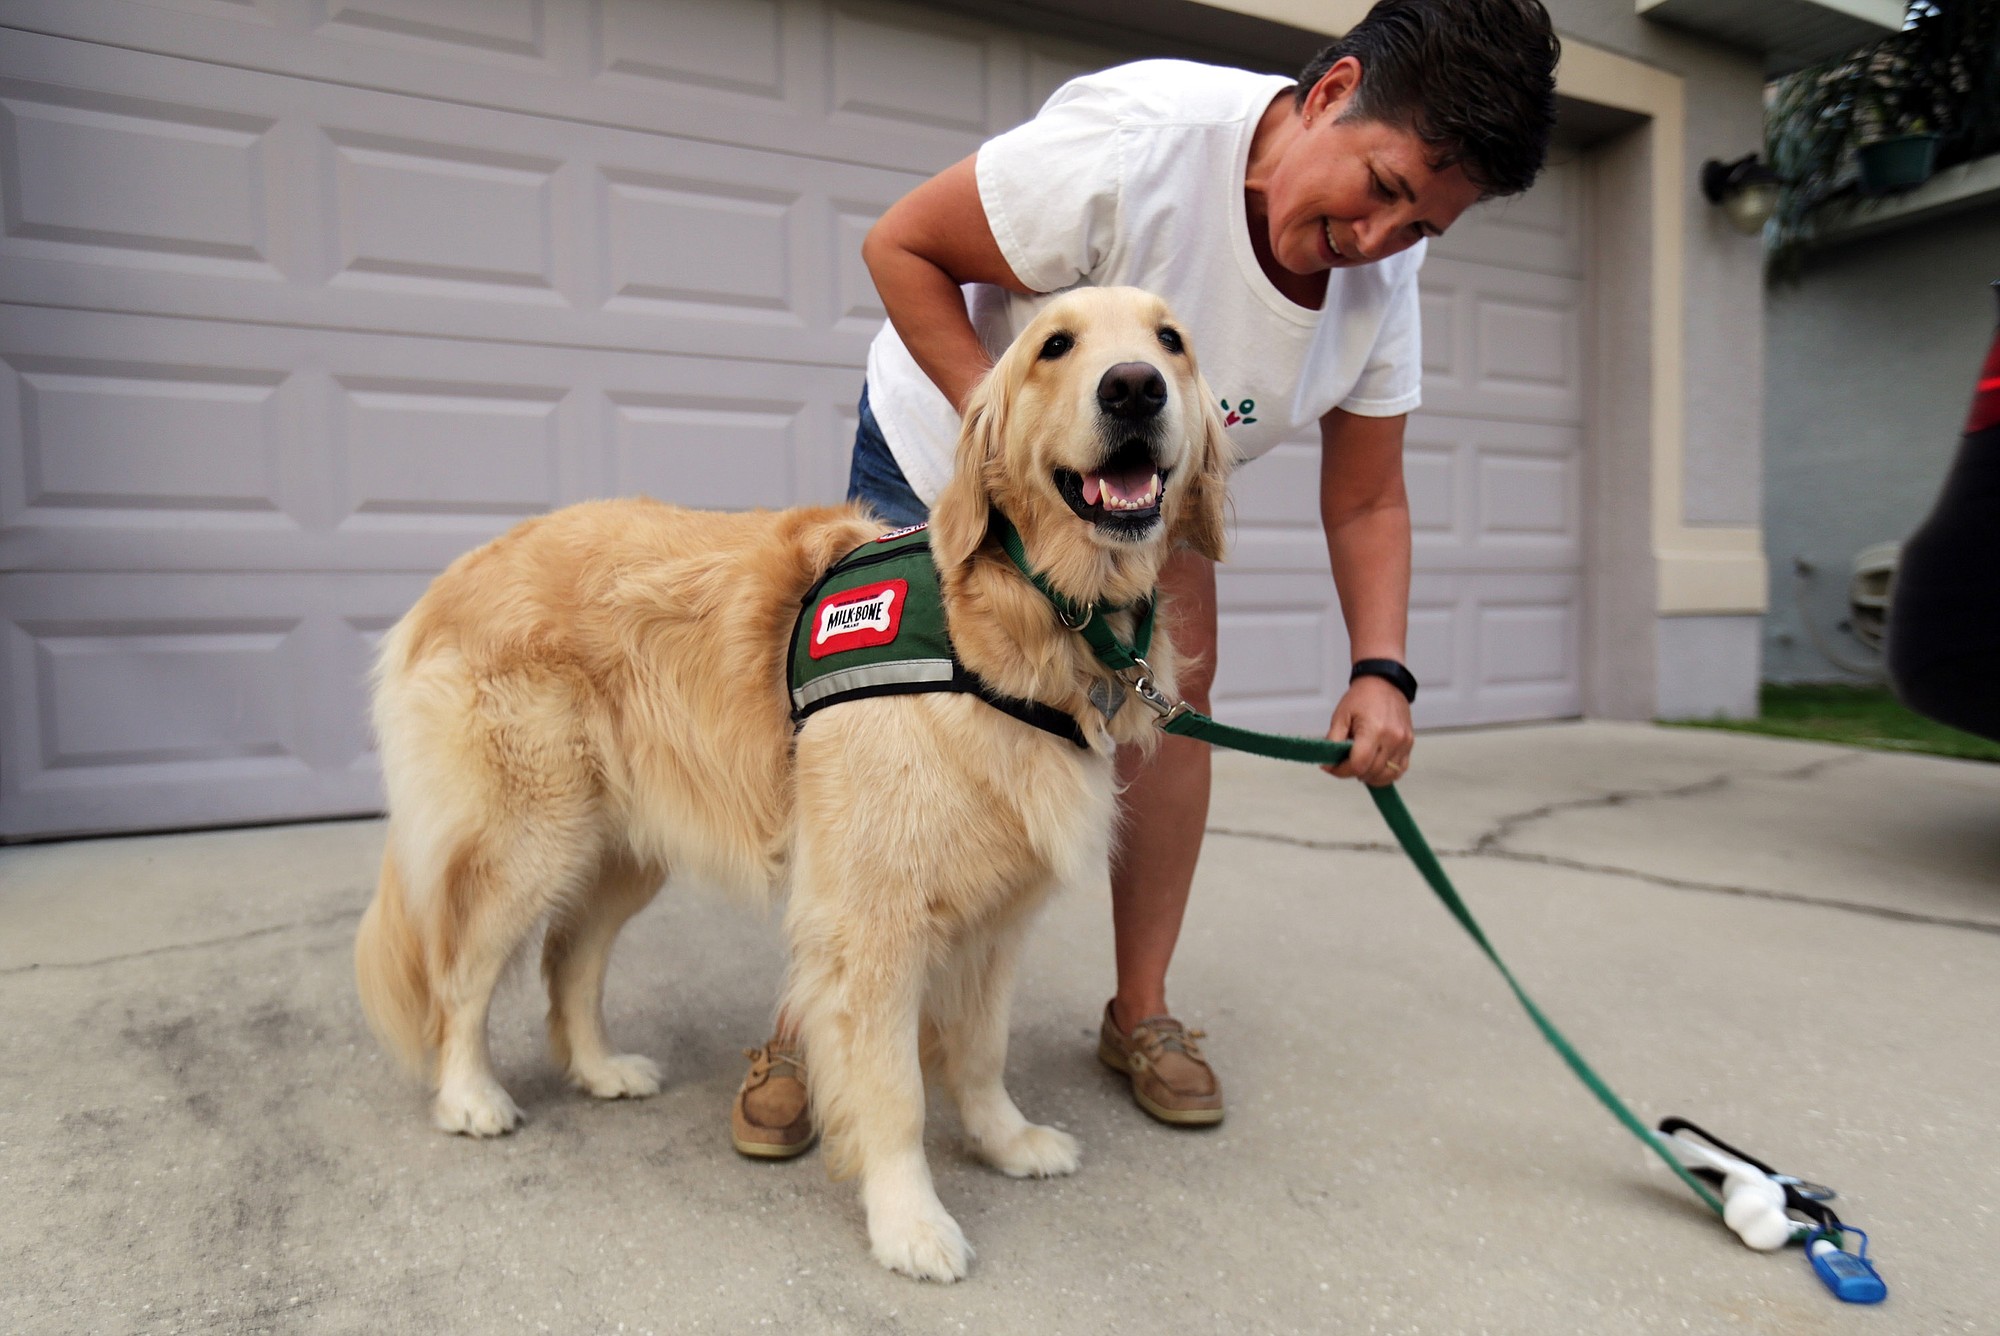 Lori Eagen commends her service dog, Tober, outside their home in Kissimmee, Fla., lat month. Tober, a golden retriever, can tell when Lori is about to have a seizure, and find her family members, and alert them.